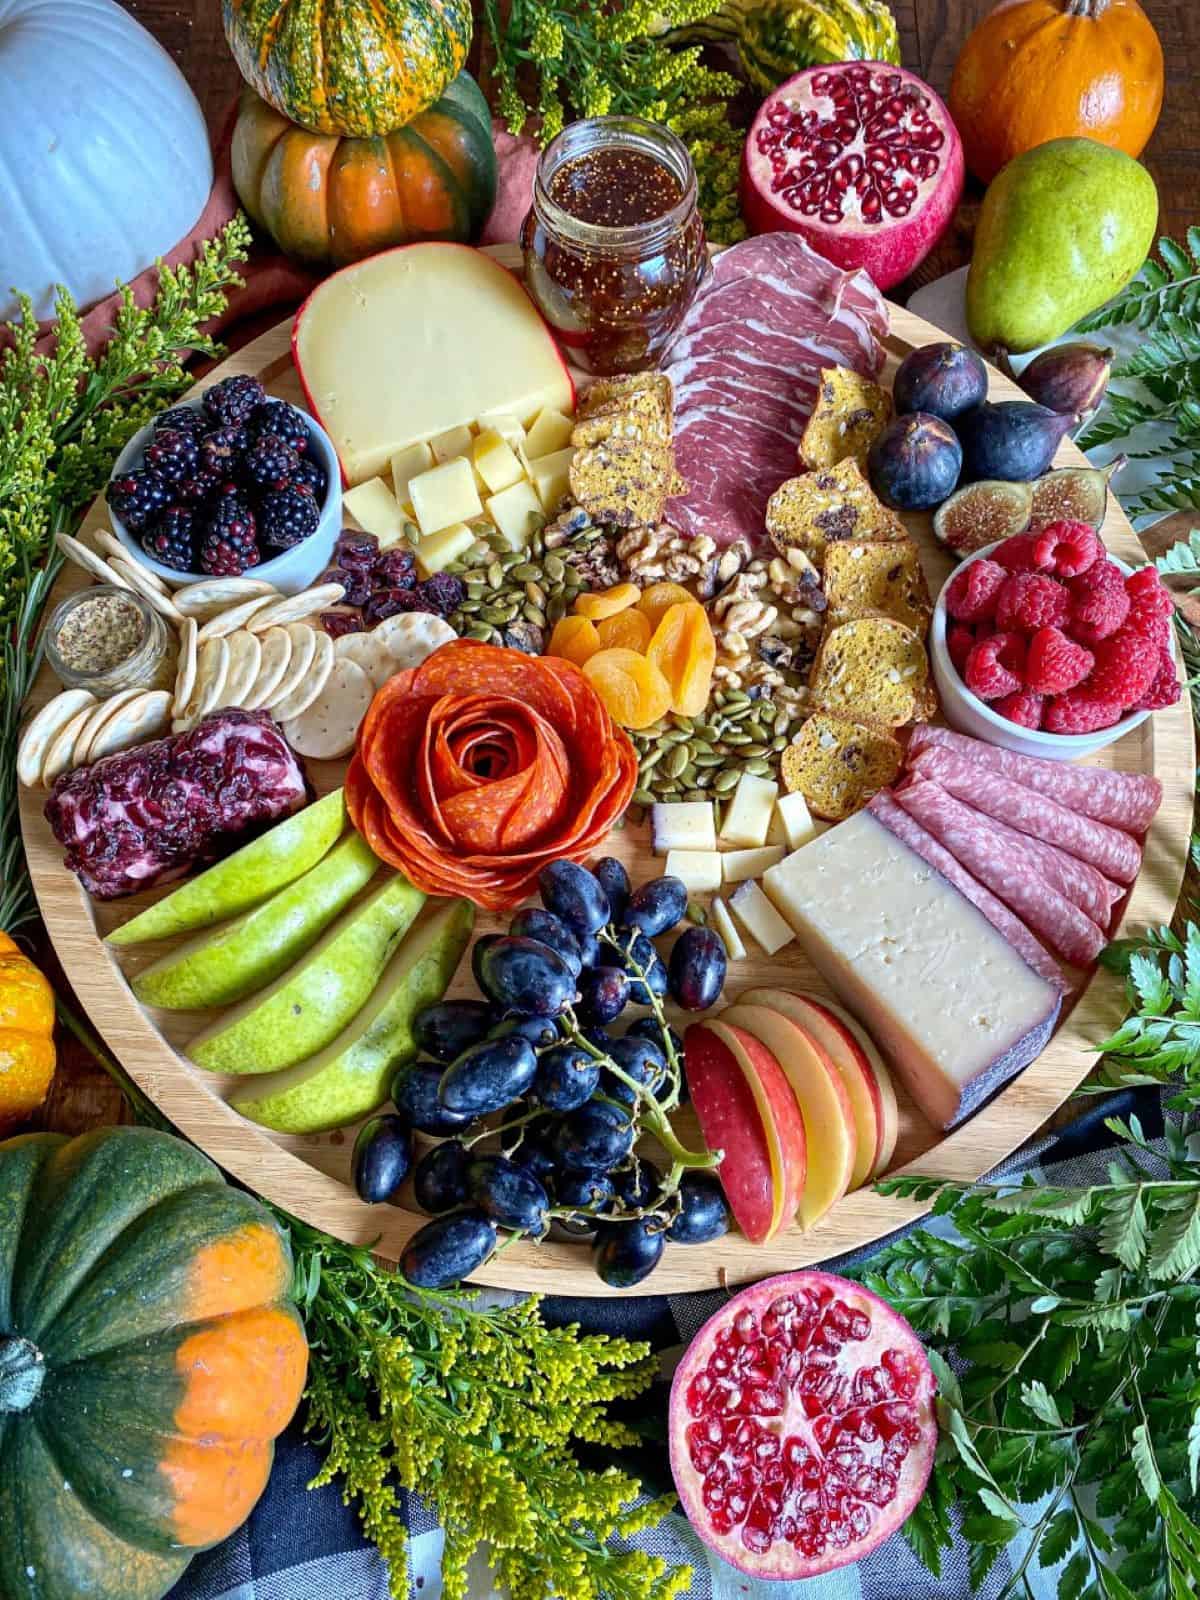 A fall themed charcuterie board full of cheeses, meats, and fruits. Greenery and fresh pumpkins surround the wooden board.